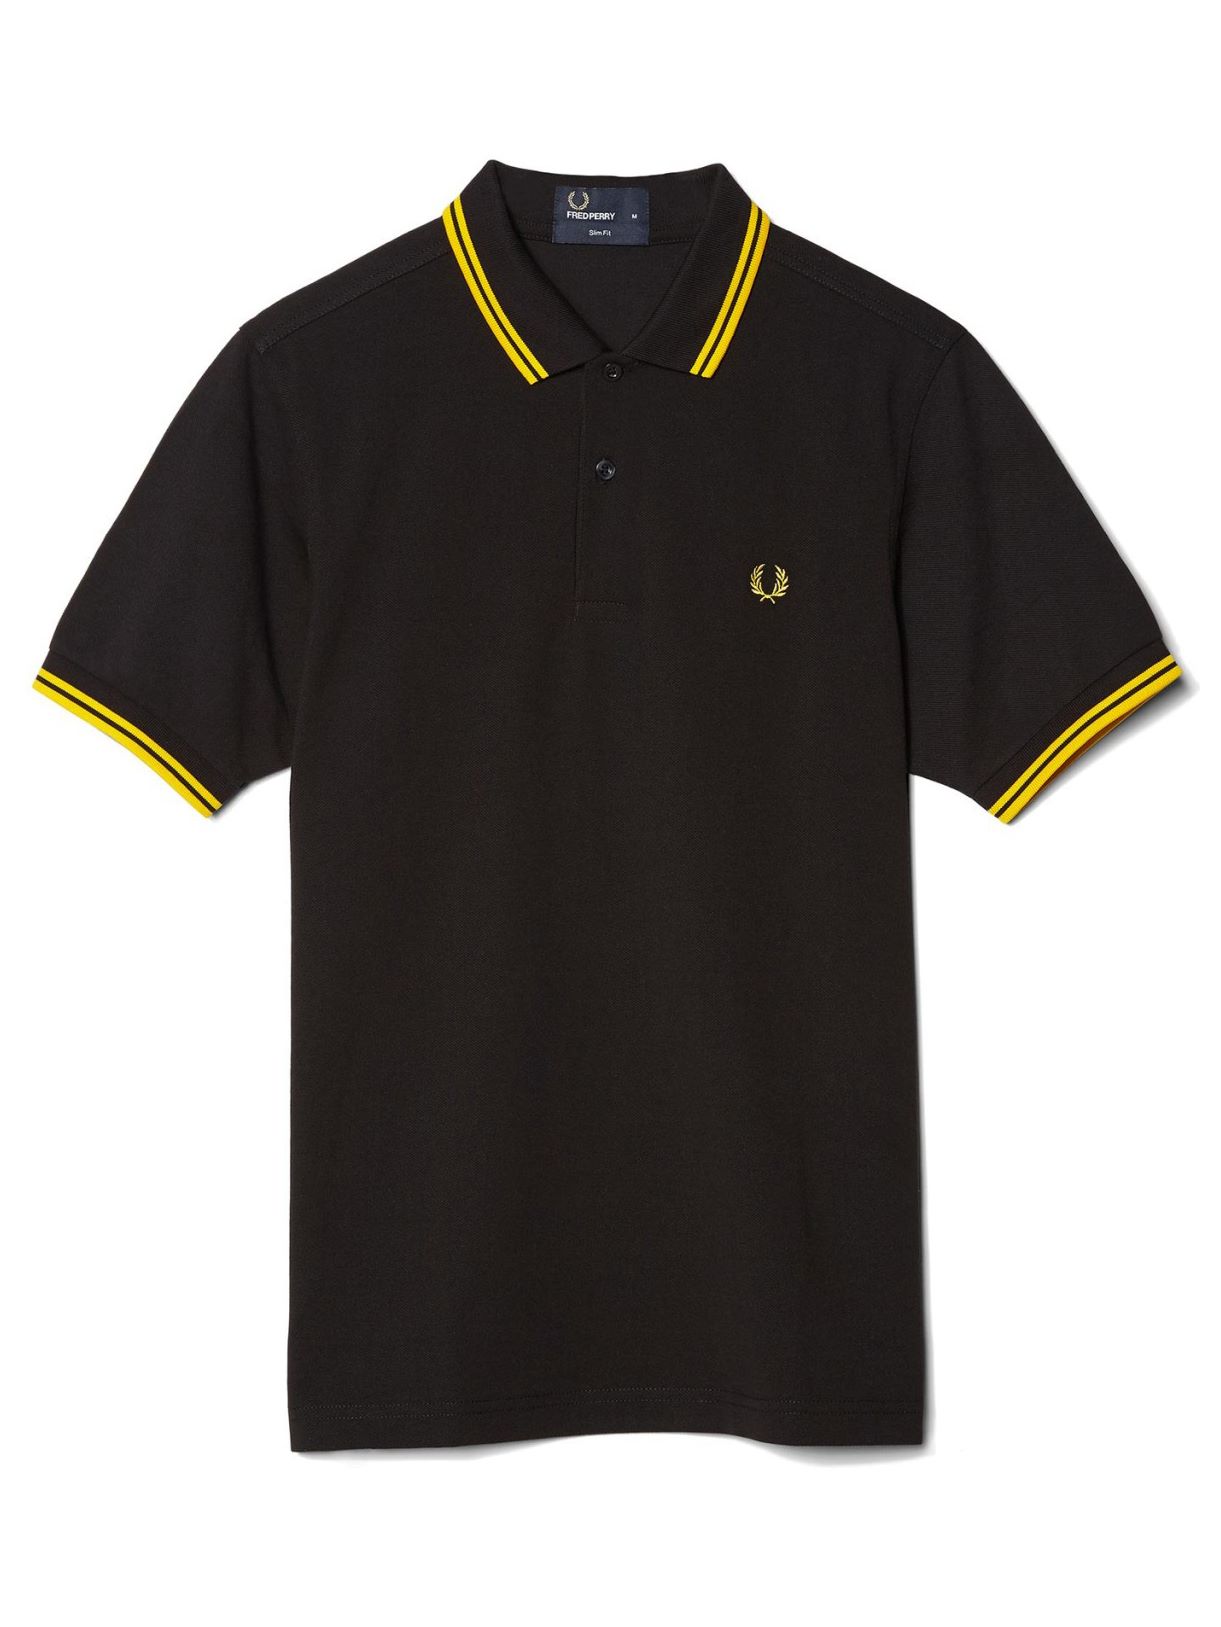 Fred Perry Twin Tipped Polo in Black New Yellow | Dapper Street